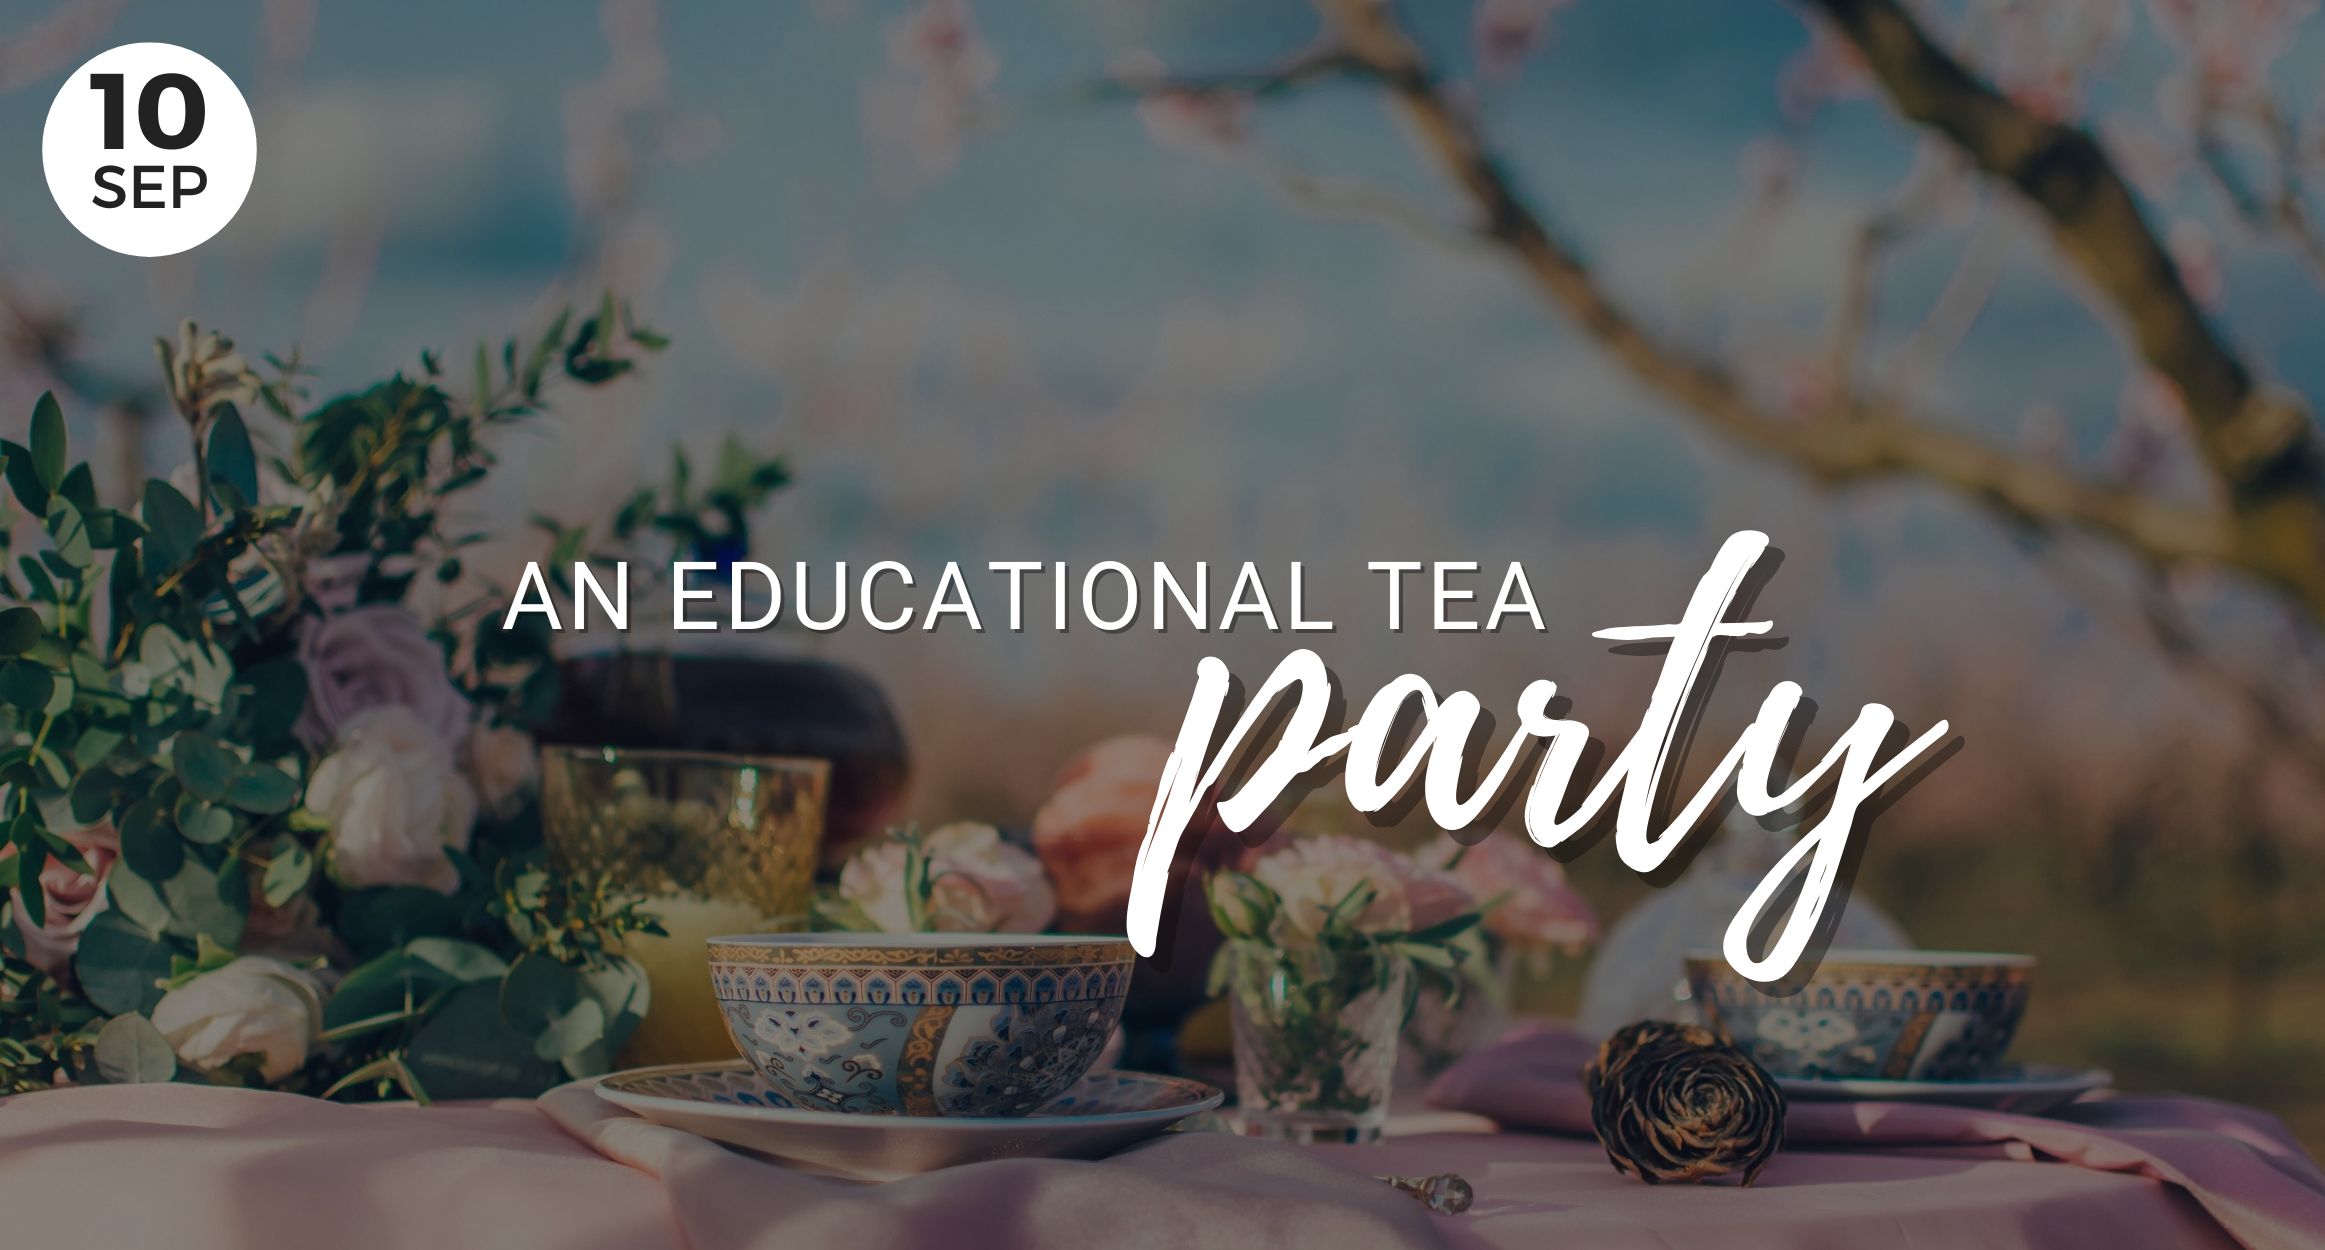 Lotus tea bar and studio, Windermere Real Estate, Oak Harbor, Whidbey Island, An educational tea party, togetherness, event, tea party, windermere